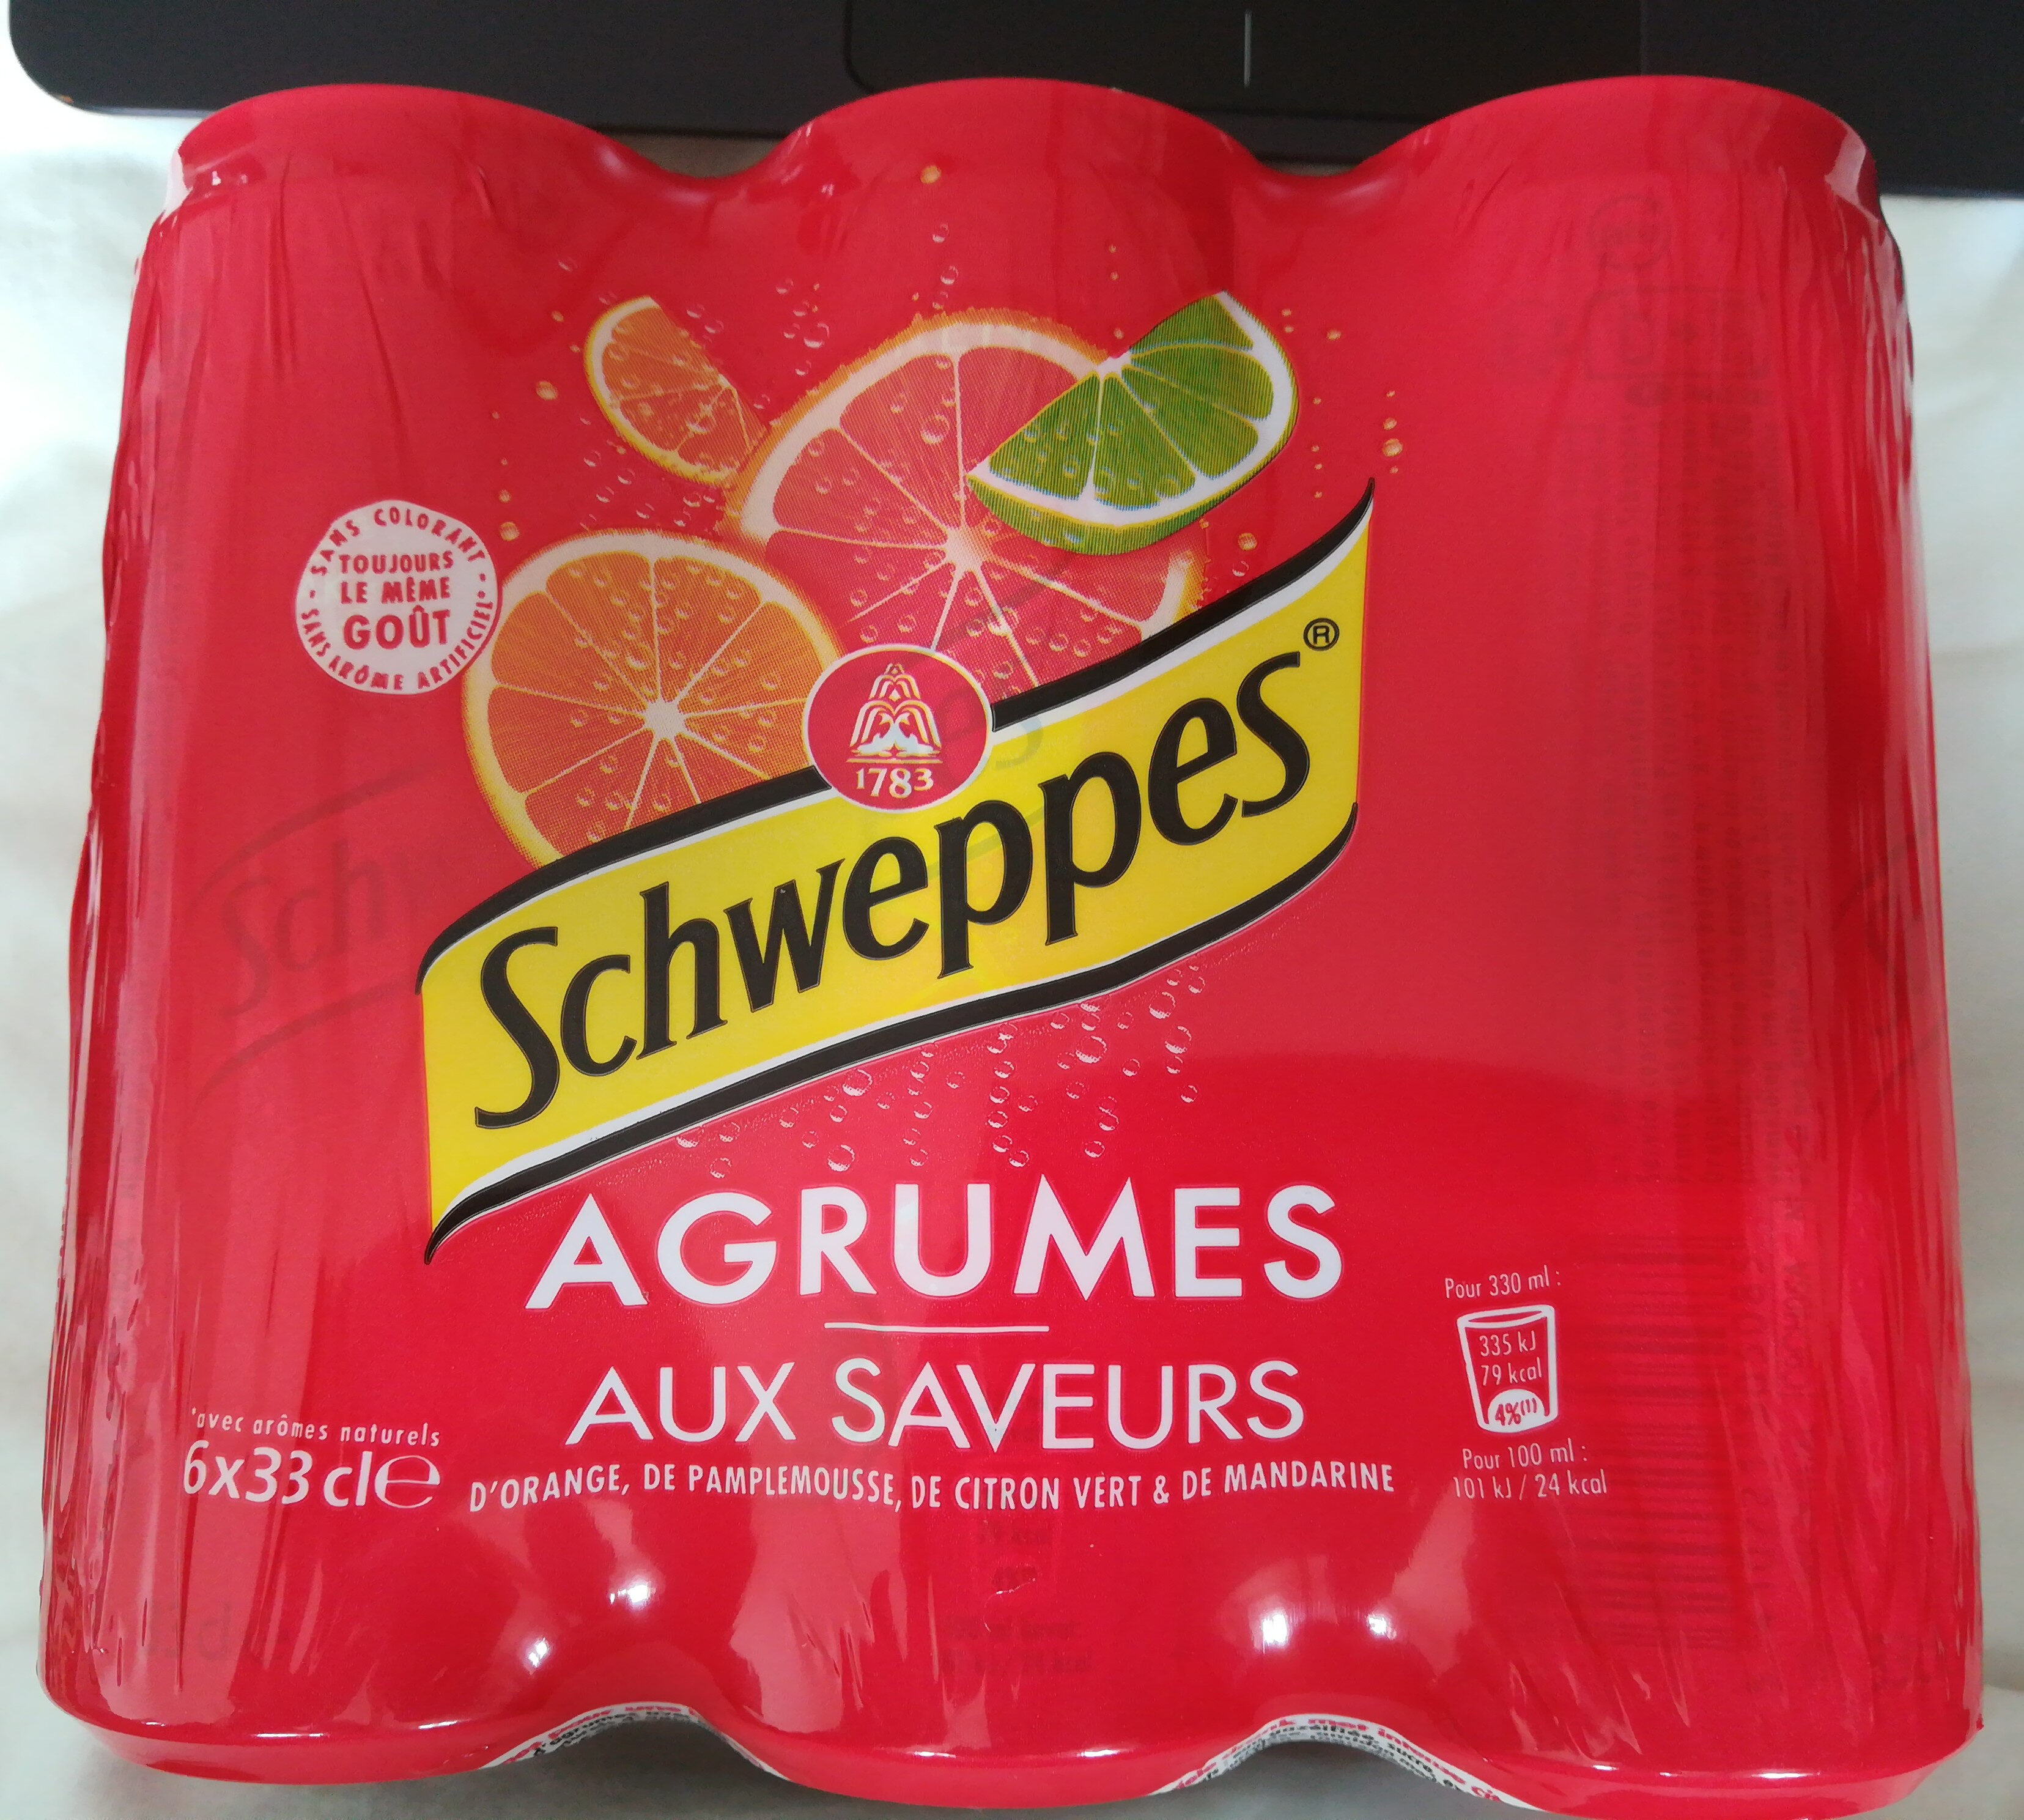 Schweppes agrumes - Product - fr